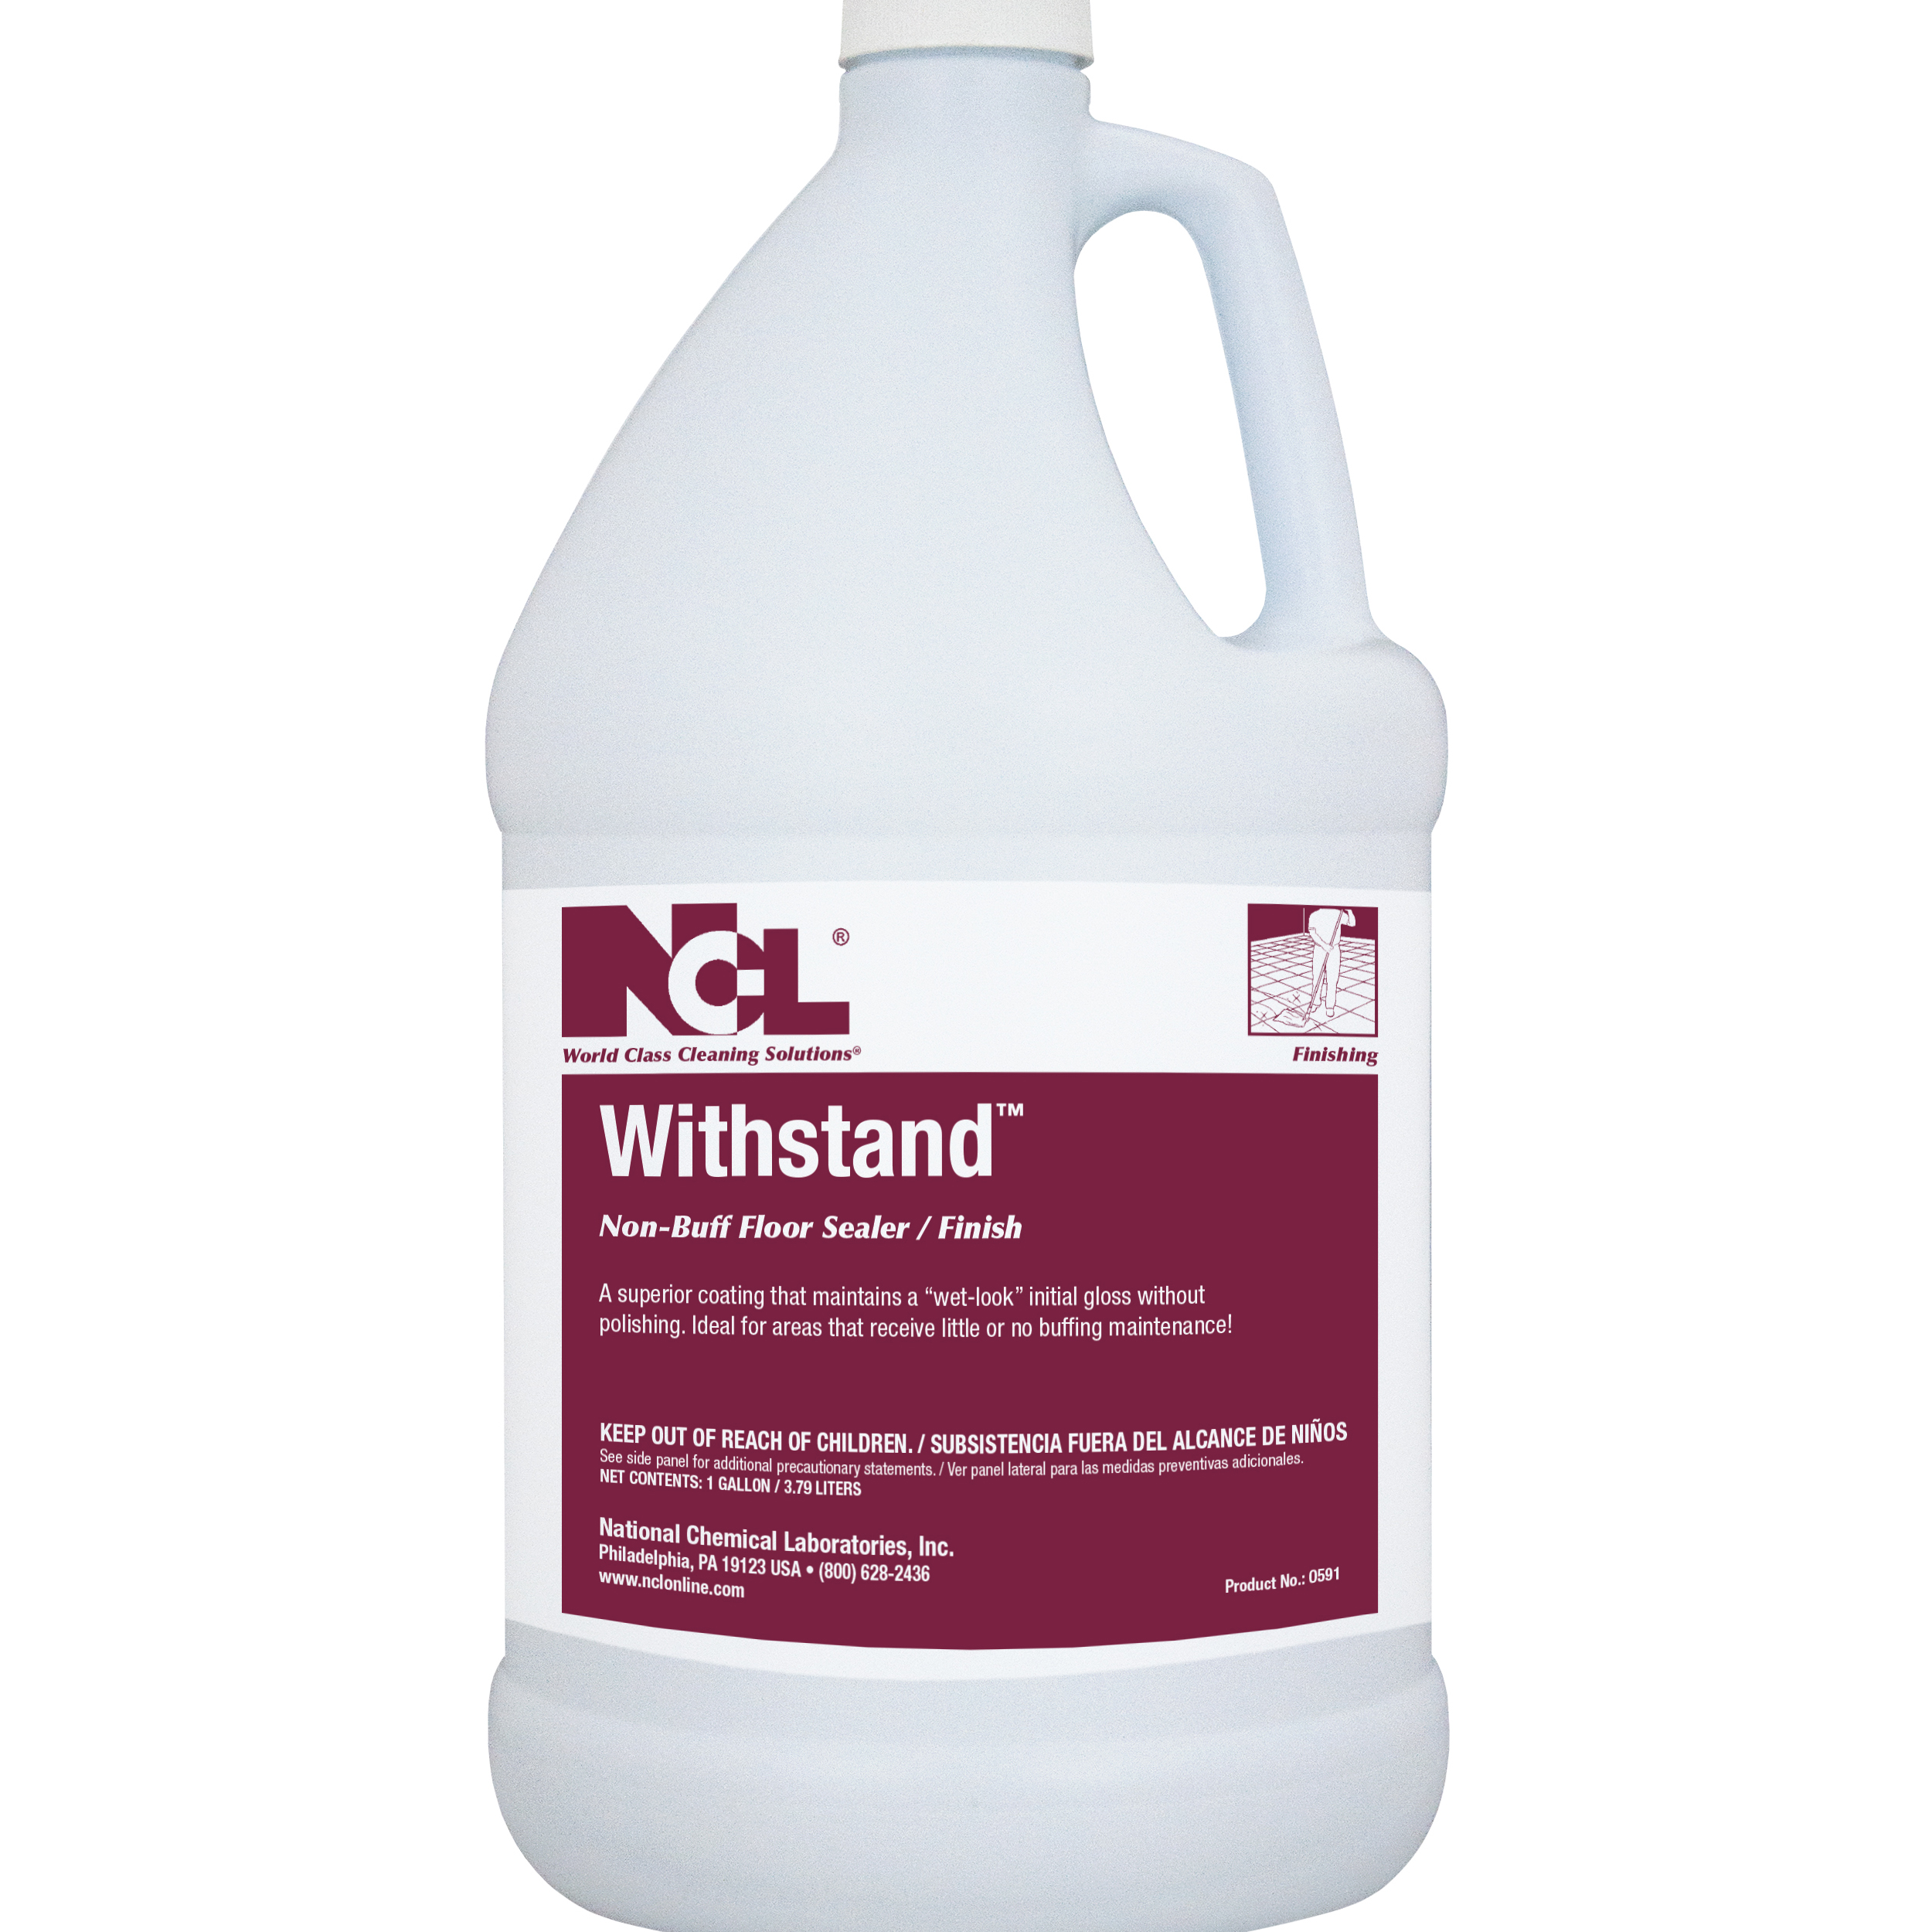  WITHSTAND Non-Buff Floor Sealer Finish 4/1 Gal. Case (NCL0591-29) 